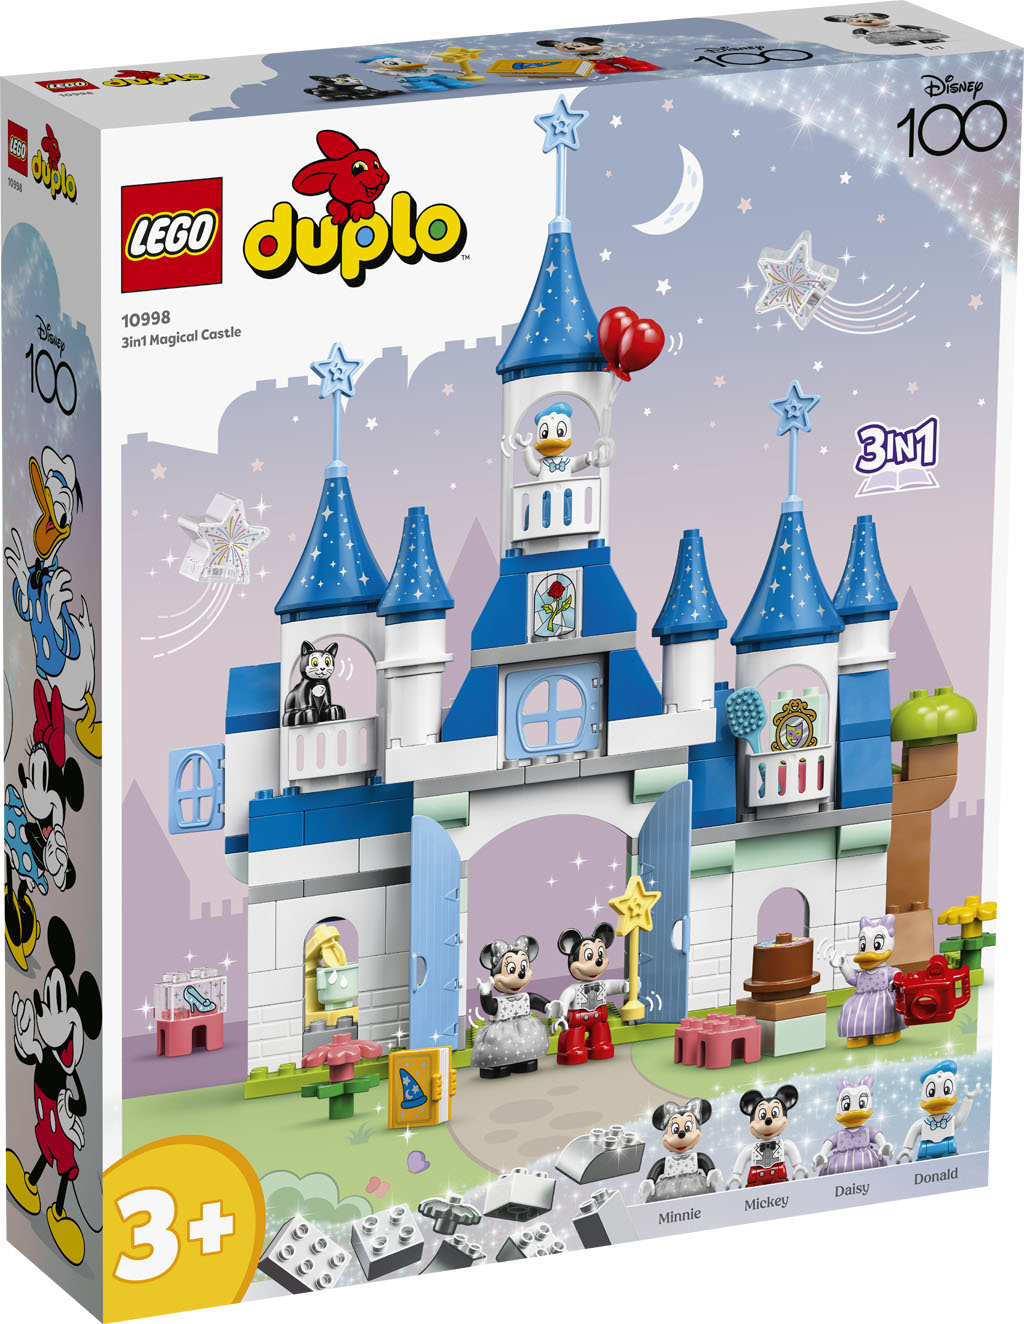 LEGO Disney 100 Sets Officially Announced - The Brick Fan